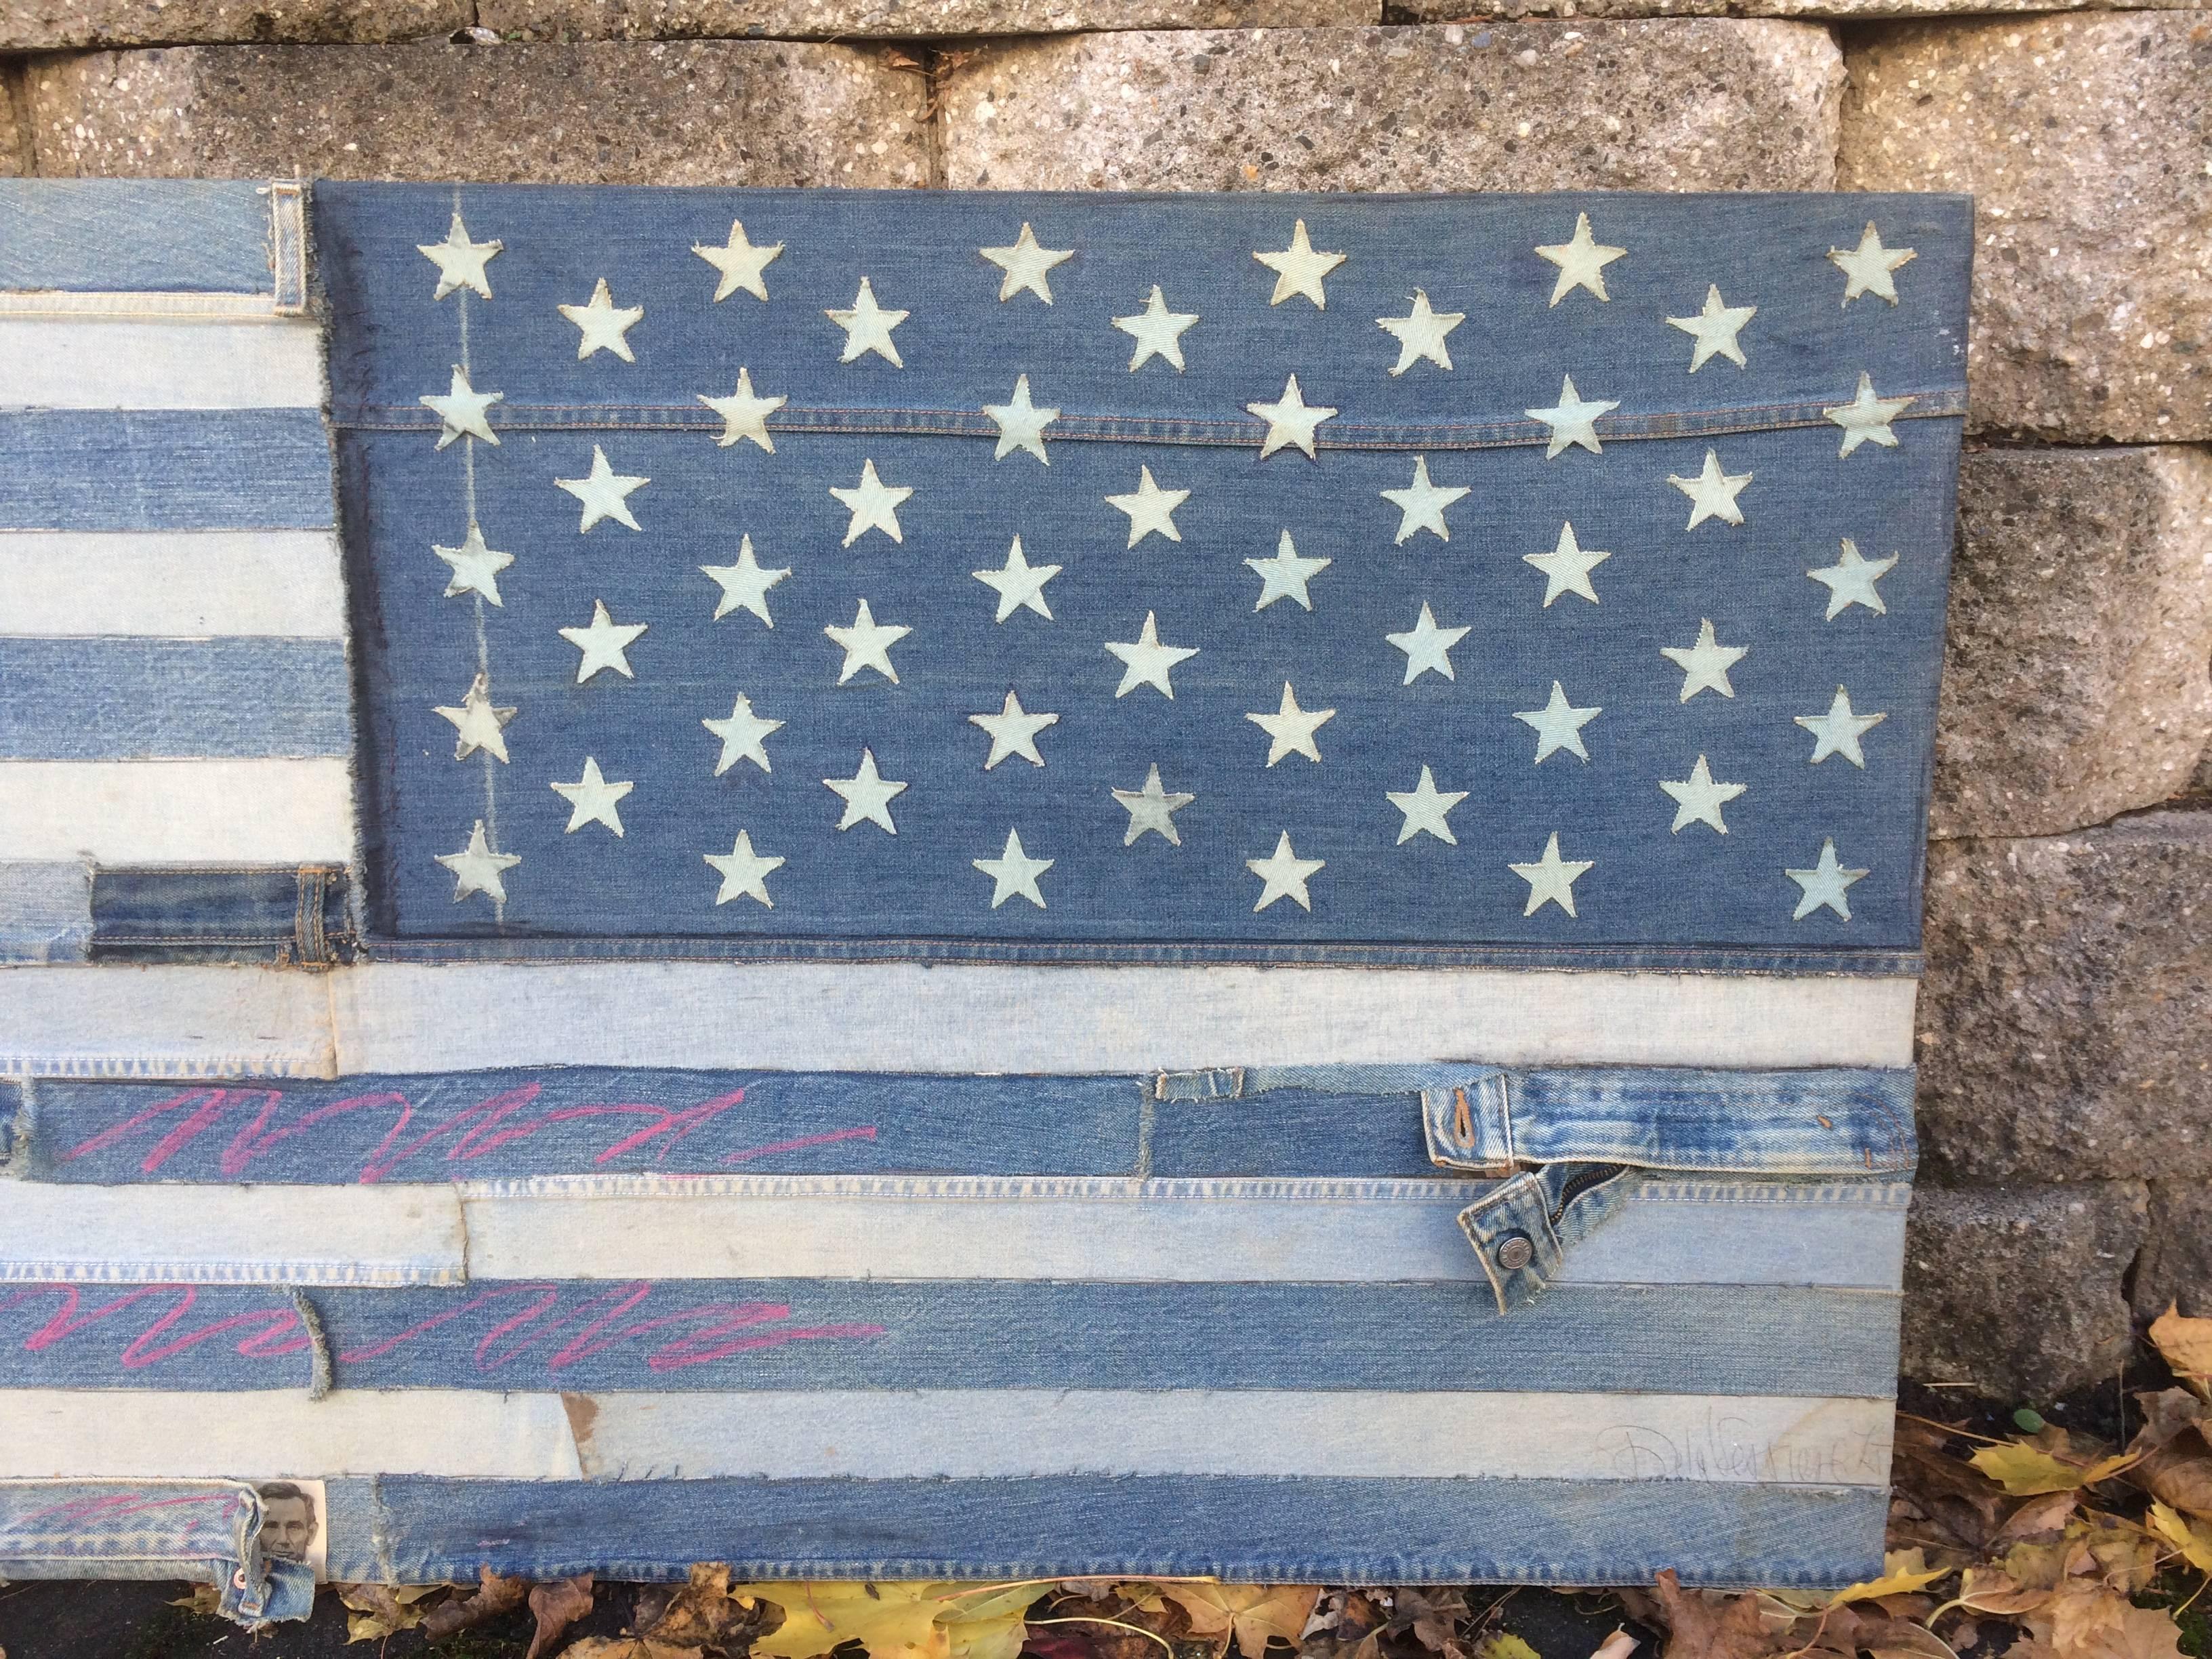 An American flag in denim by a French artist living in New York City, Jacques de la Verriere, from his personal collection. An untrained 'outsider' artist, he did sell some of his denim flag works through OK Harris gallery in Soho in the 1980s, one